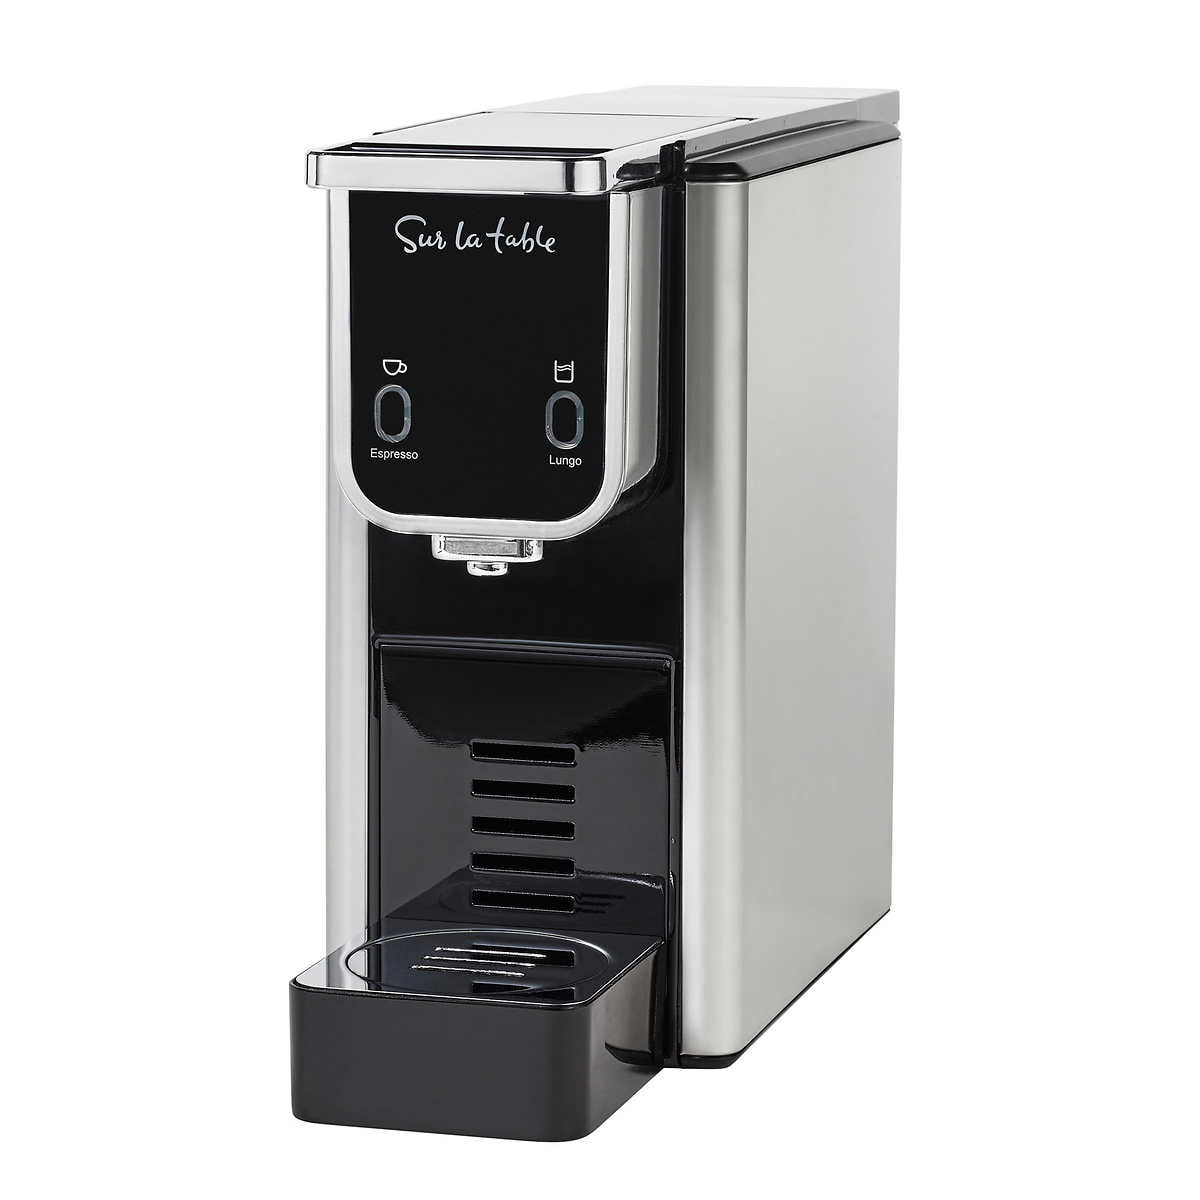 SUR LA TABLE KITCHEN ESSENTIALS 6-IN-1 Espresso Maker - Brew Lattes,  Cappuccinos and Single or Double Espressos, Automatic Milk Frother and  Digital